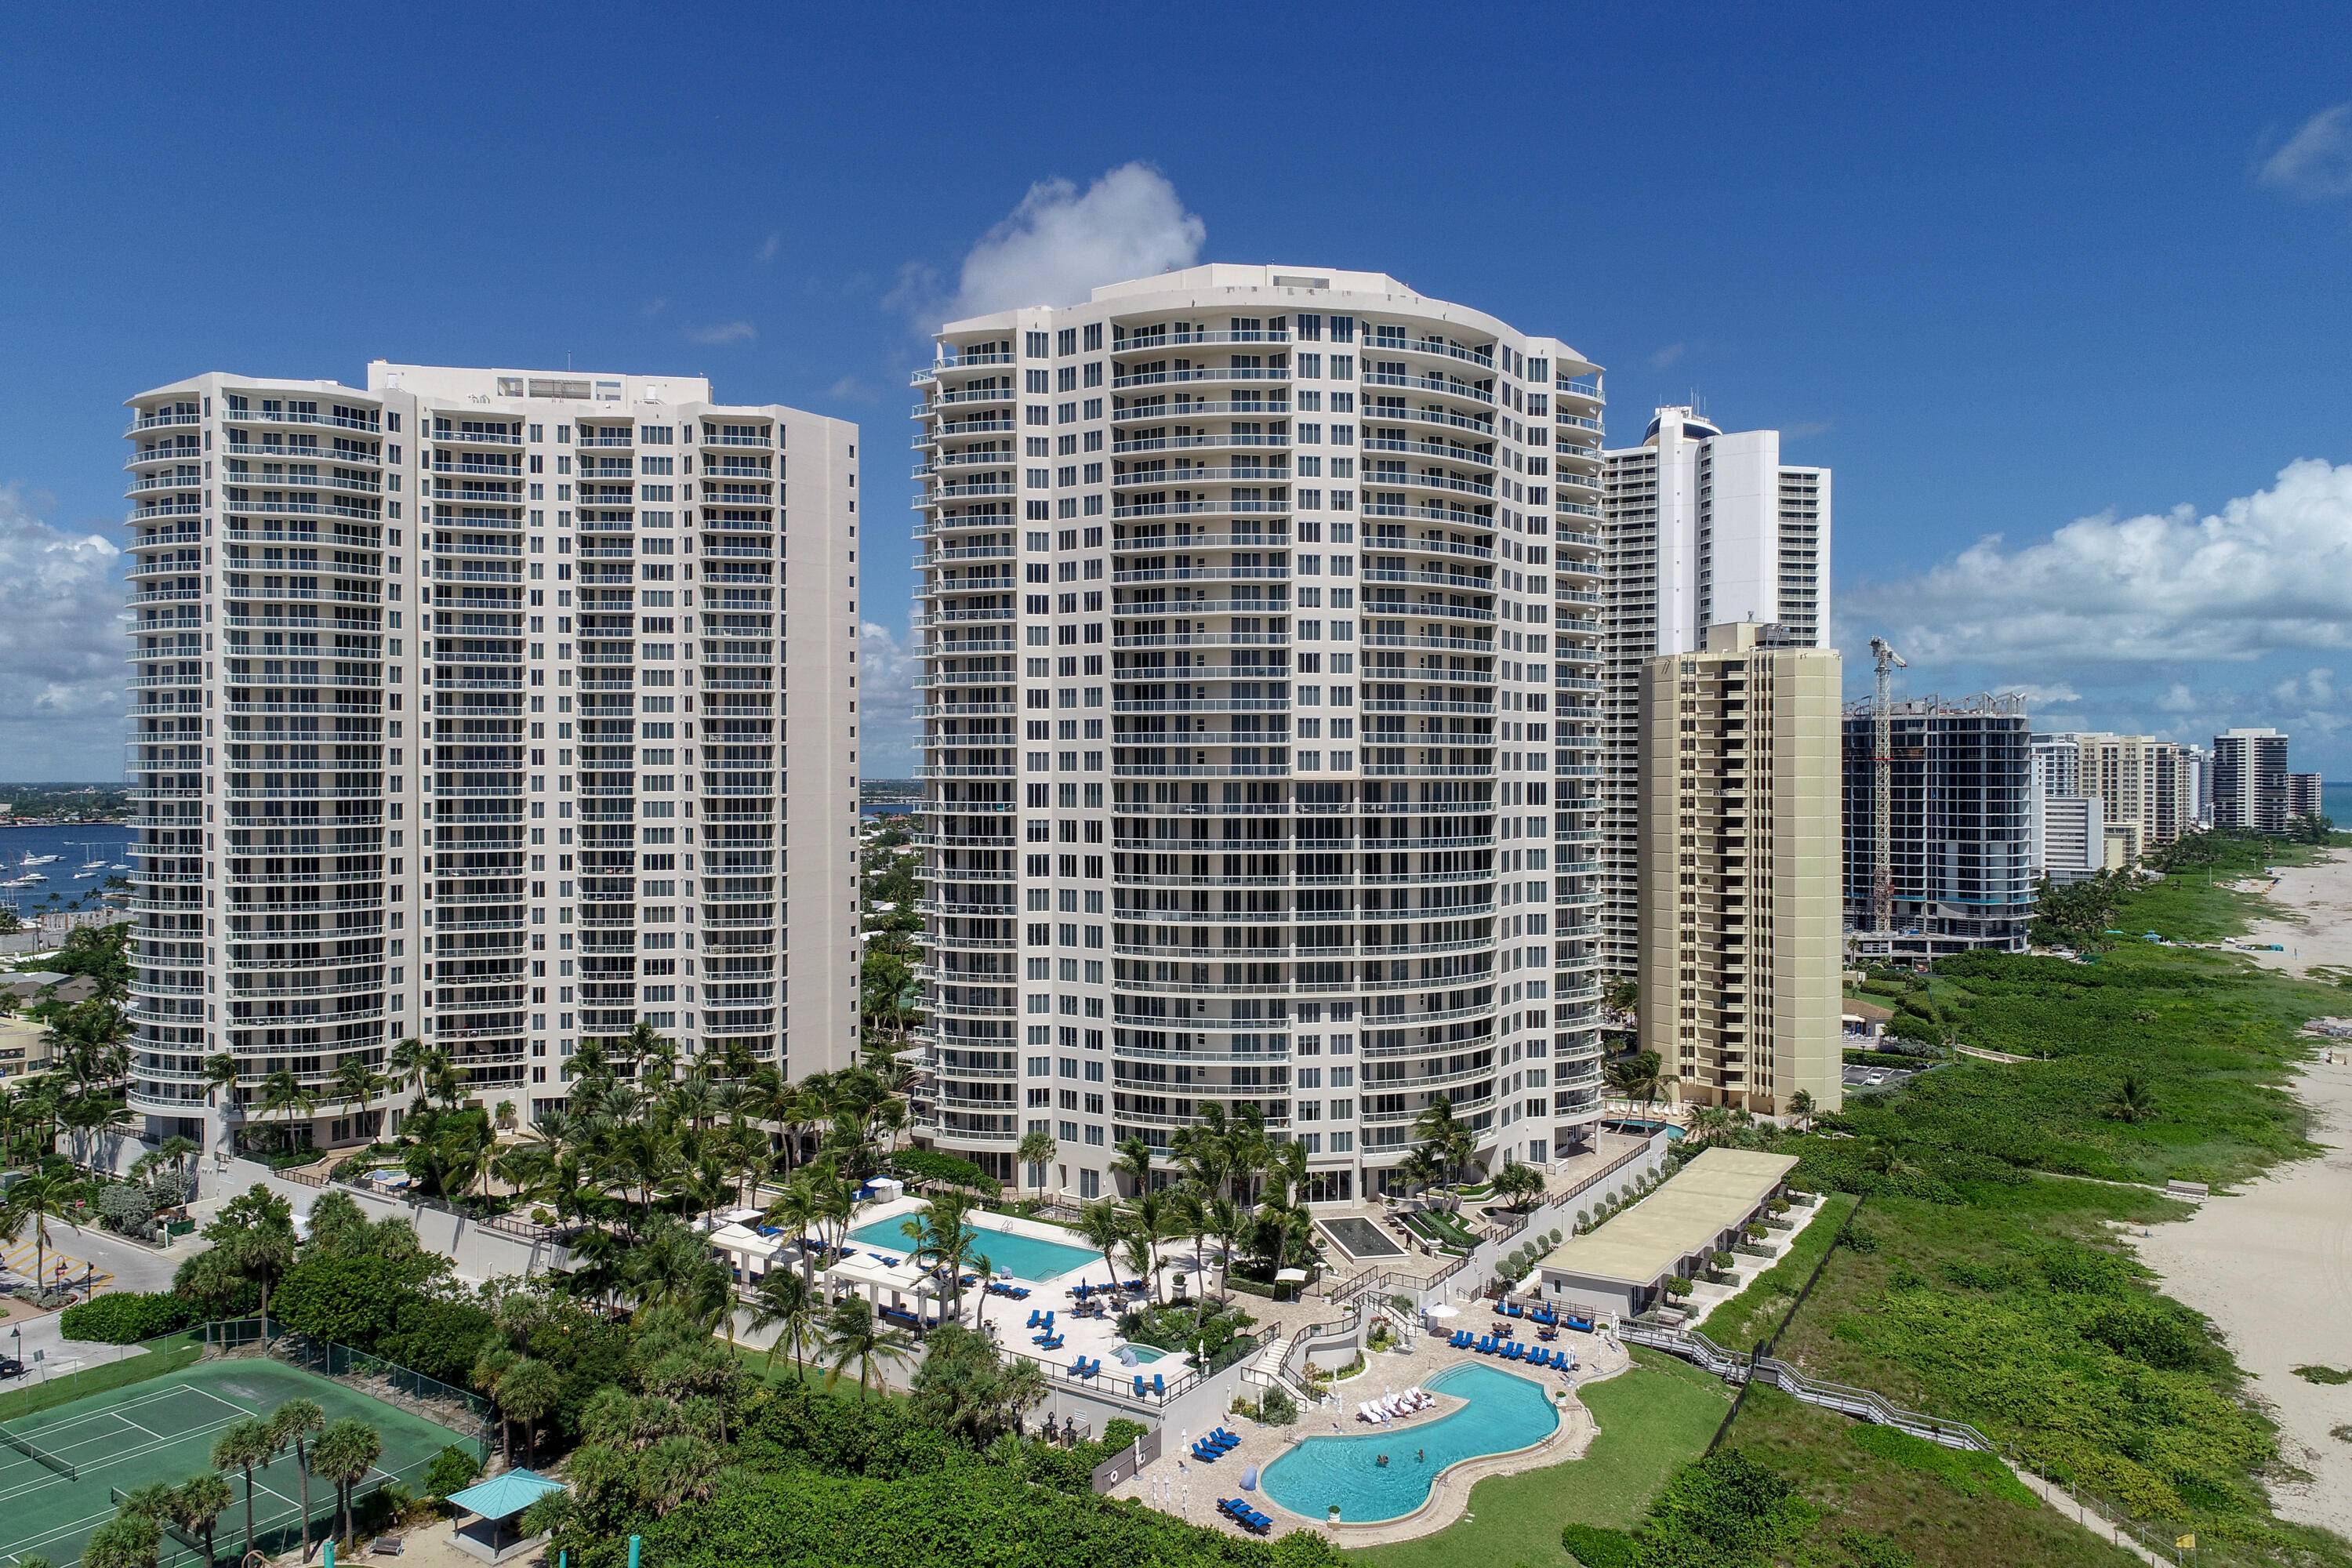 An exceptional opportunity to lease at the Ritz Carlton Singer Island.